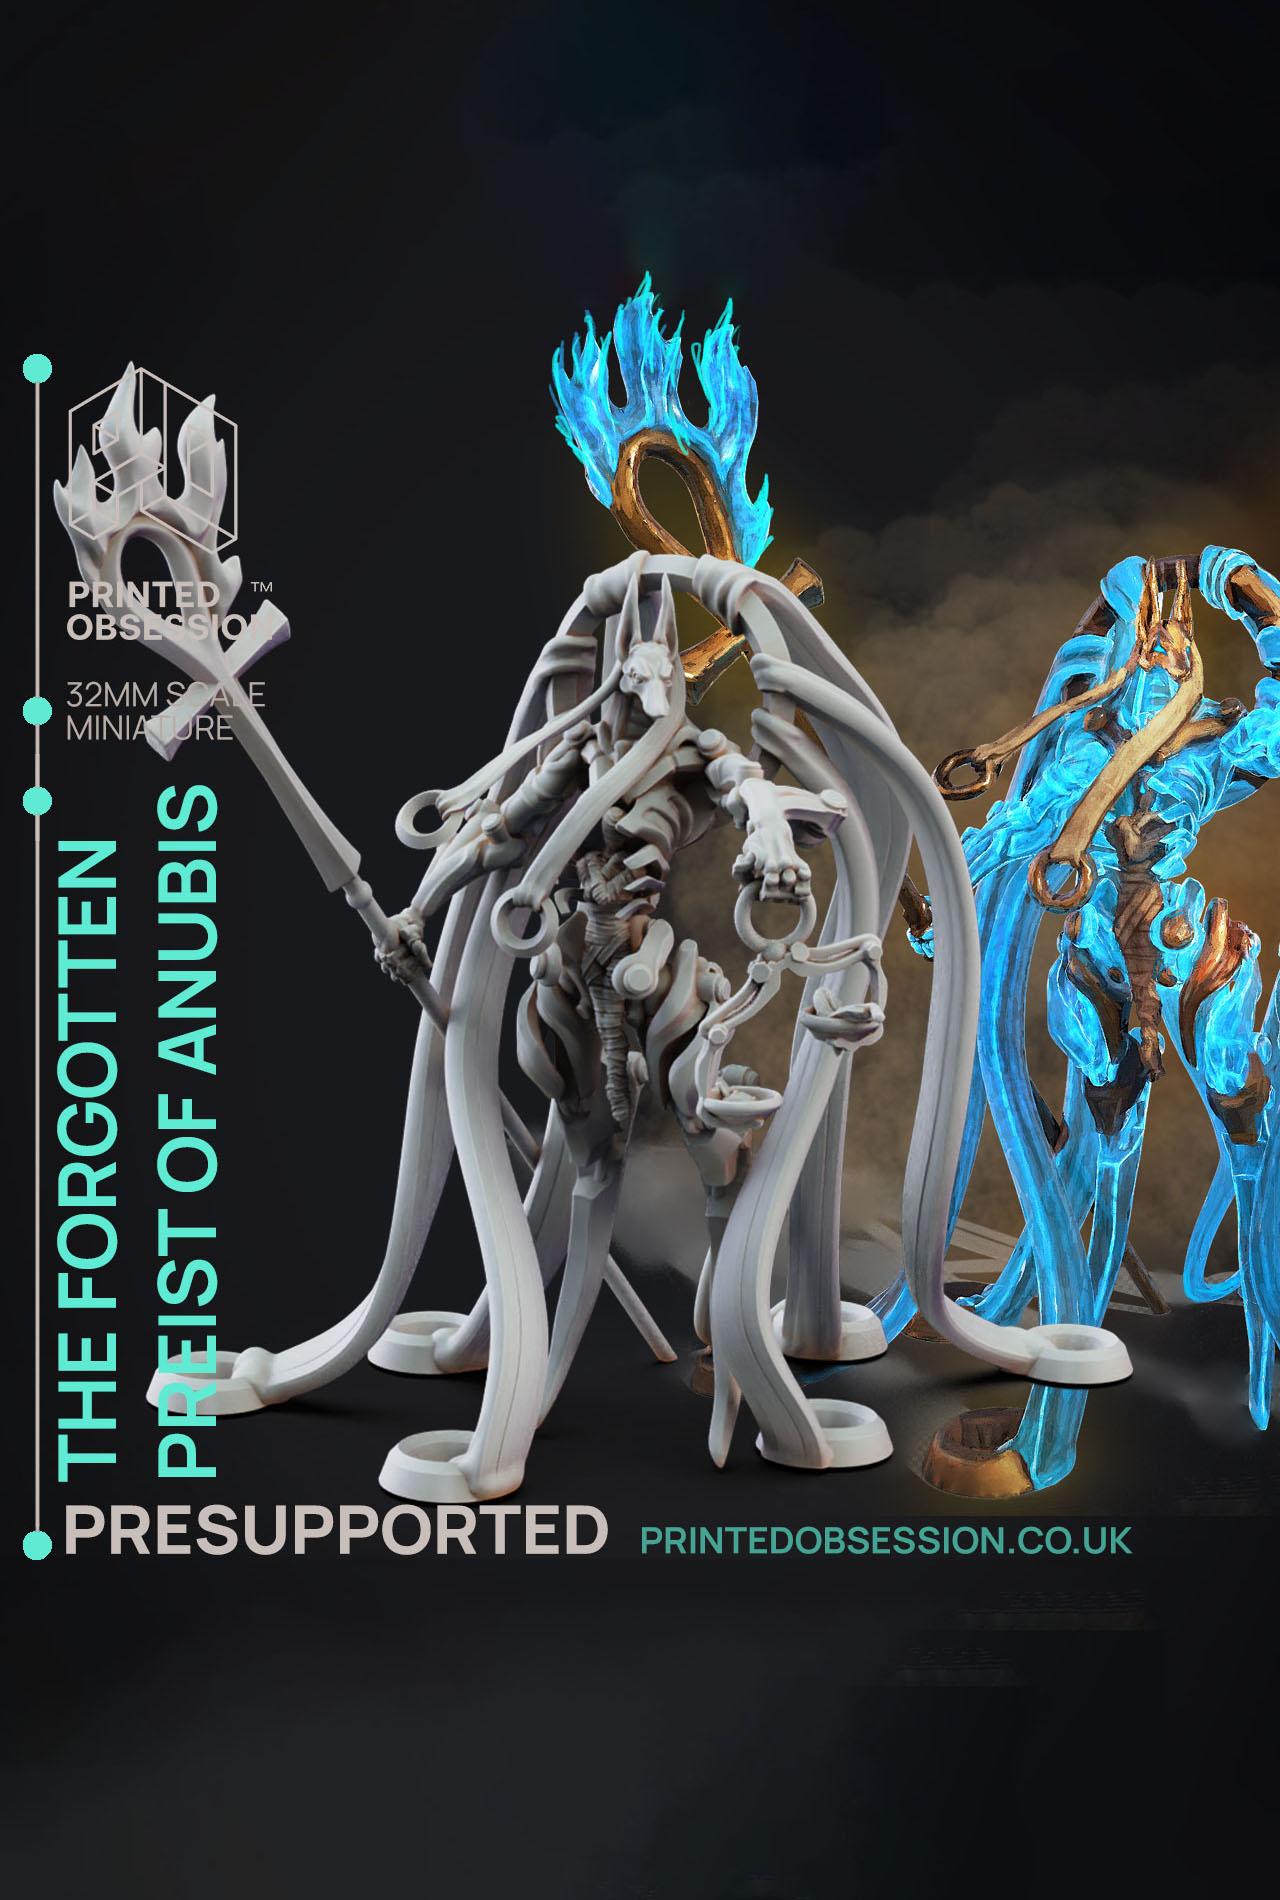 The Forgotten Preist of Anubis - Deity Fight Club - PRESUPPORTED - Illustrated and Stats - 32mm scal 3d model